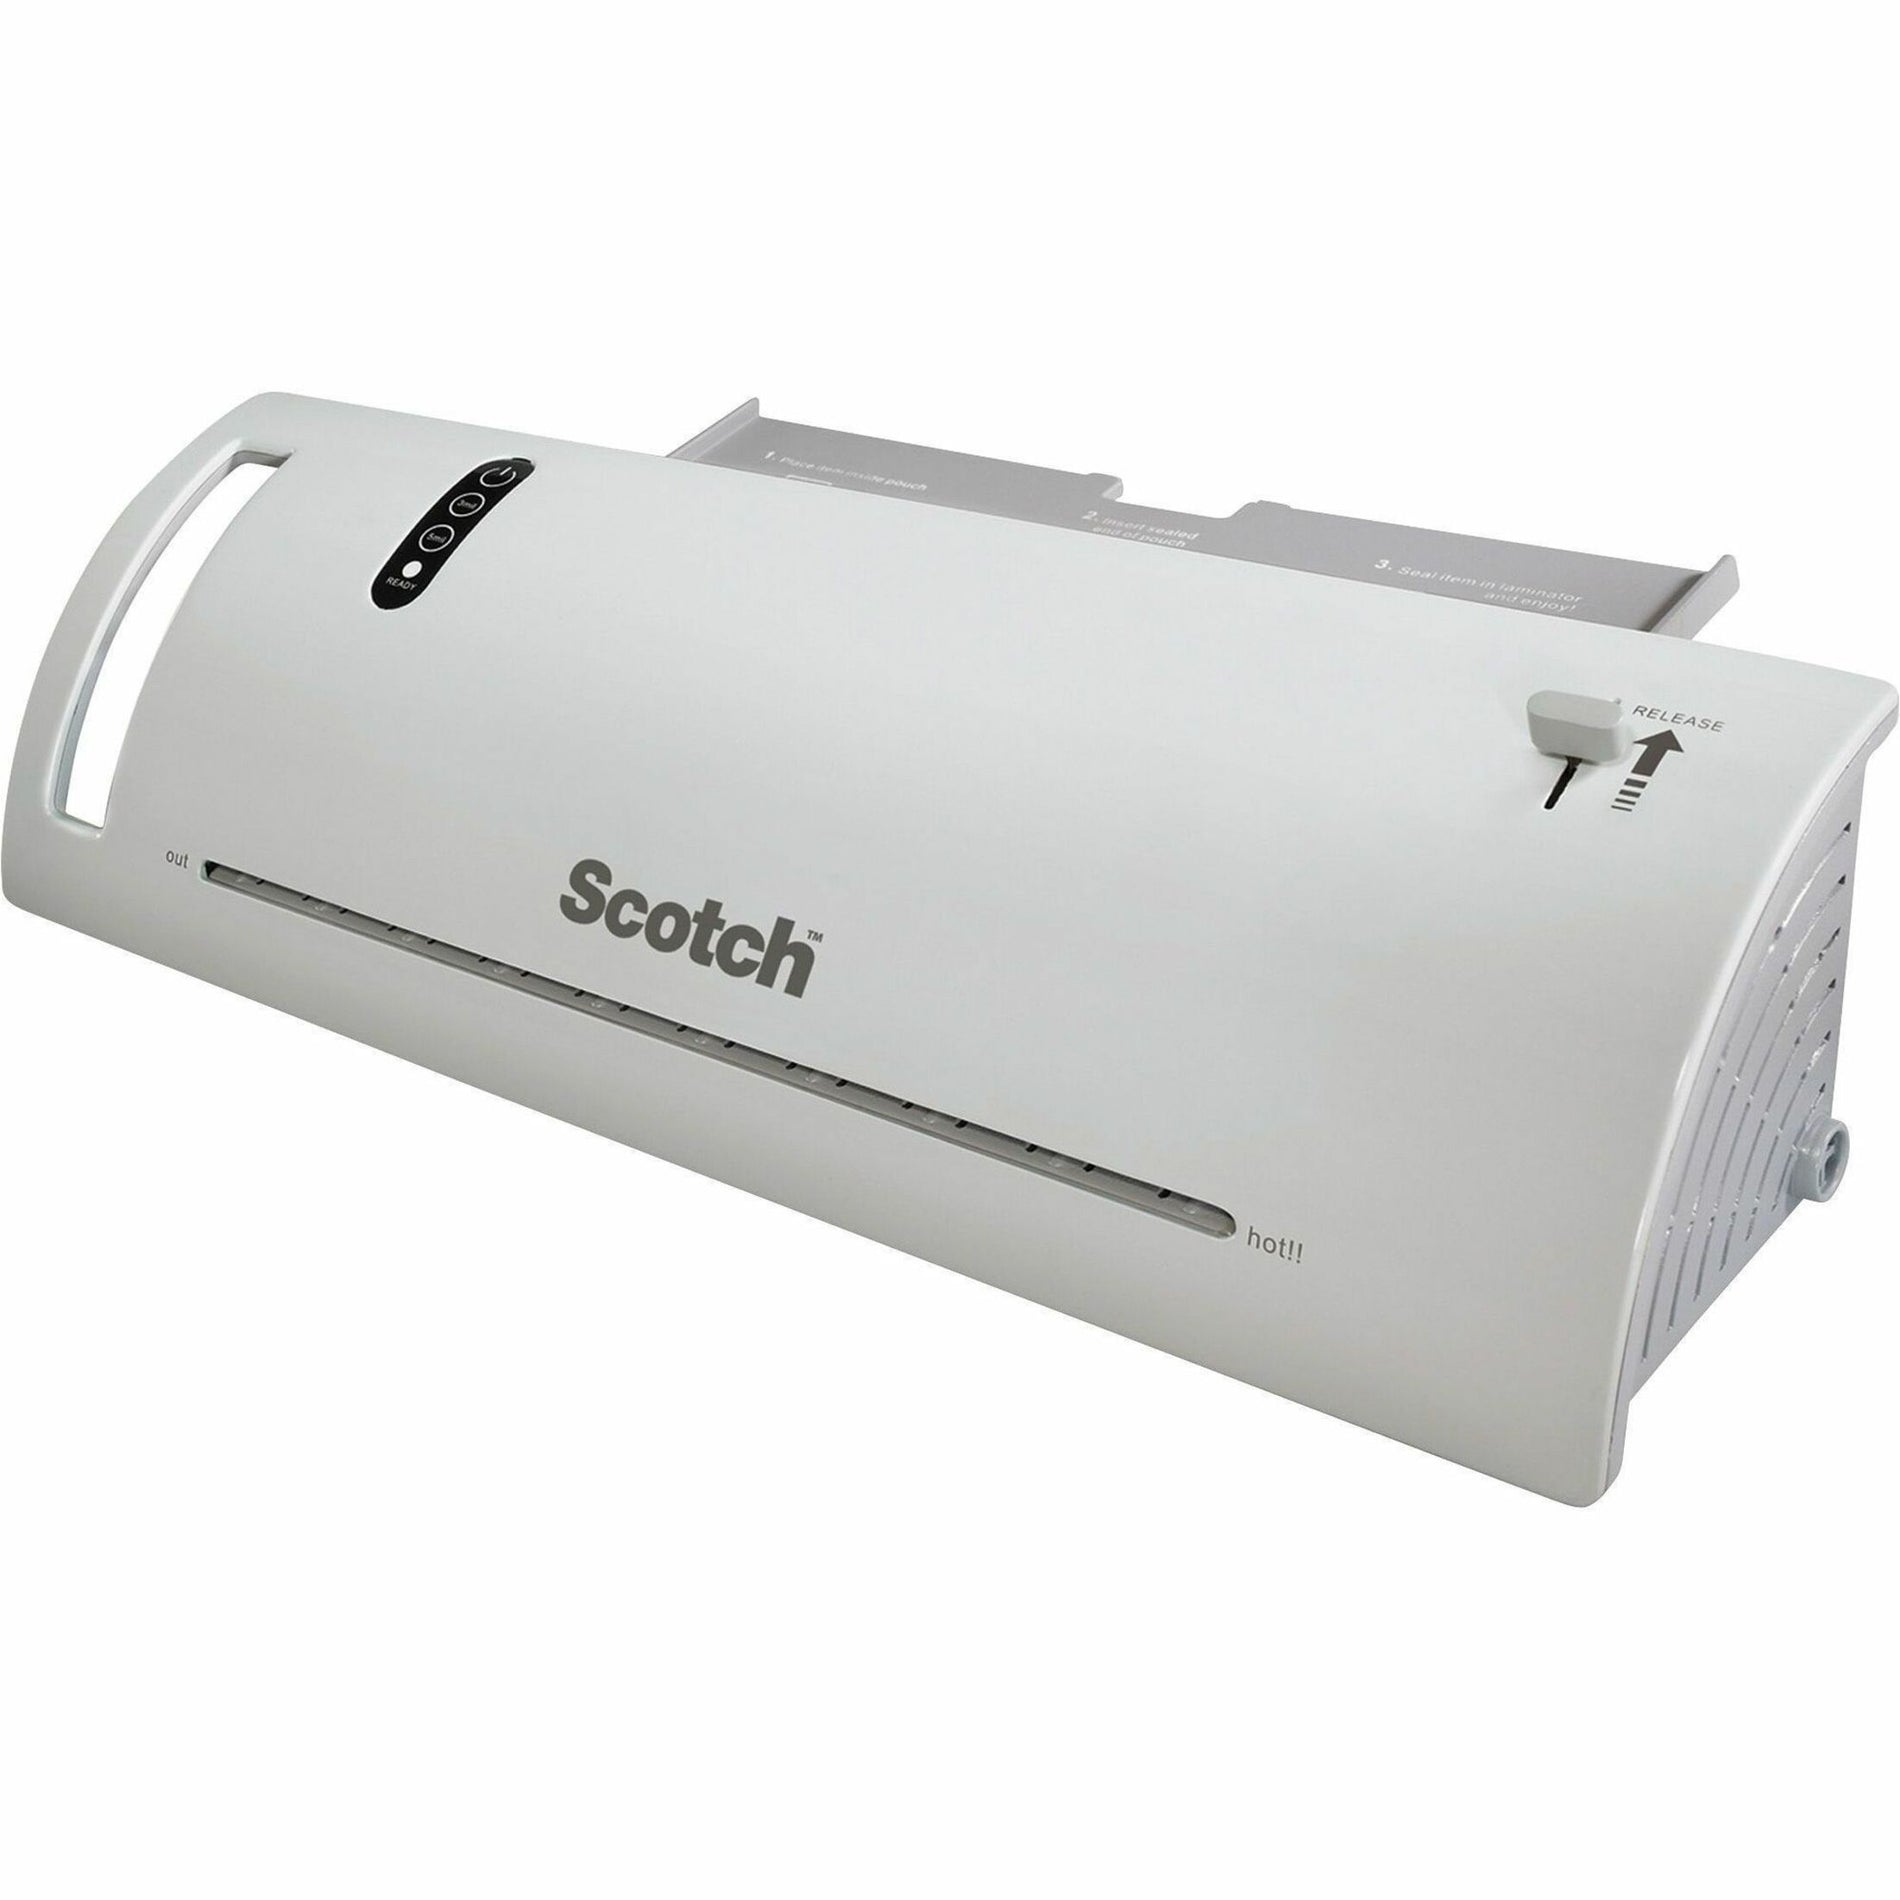 Scotch TL902VP Thermal Laminator Combo Pack, Fast Warm-up, Portable, 9" Lamination Width